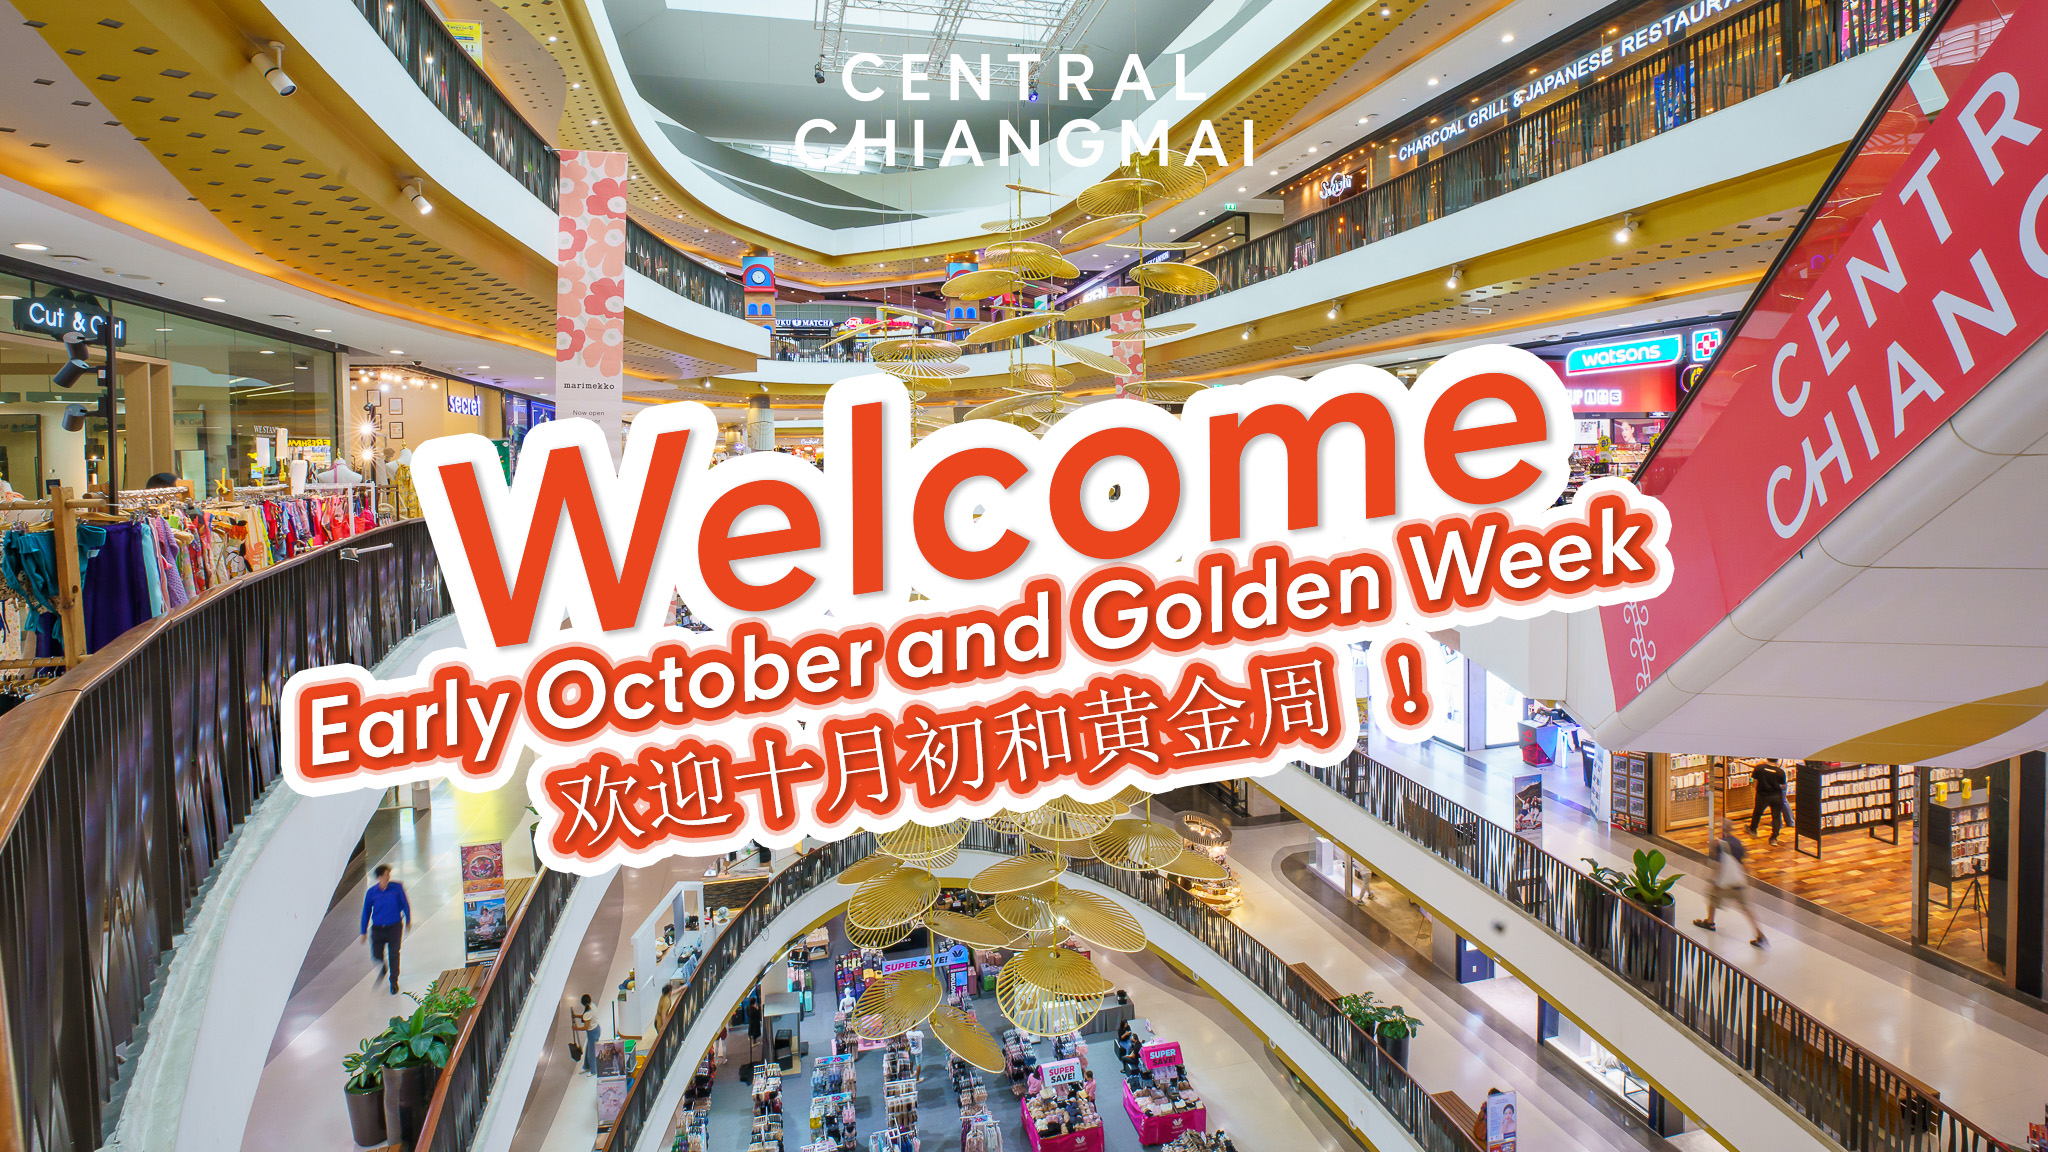 SPECIAL PROMOTIONS & GIFTS OF GOLDEN WEEK!